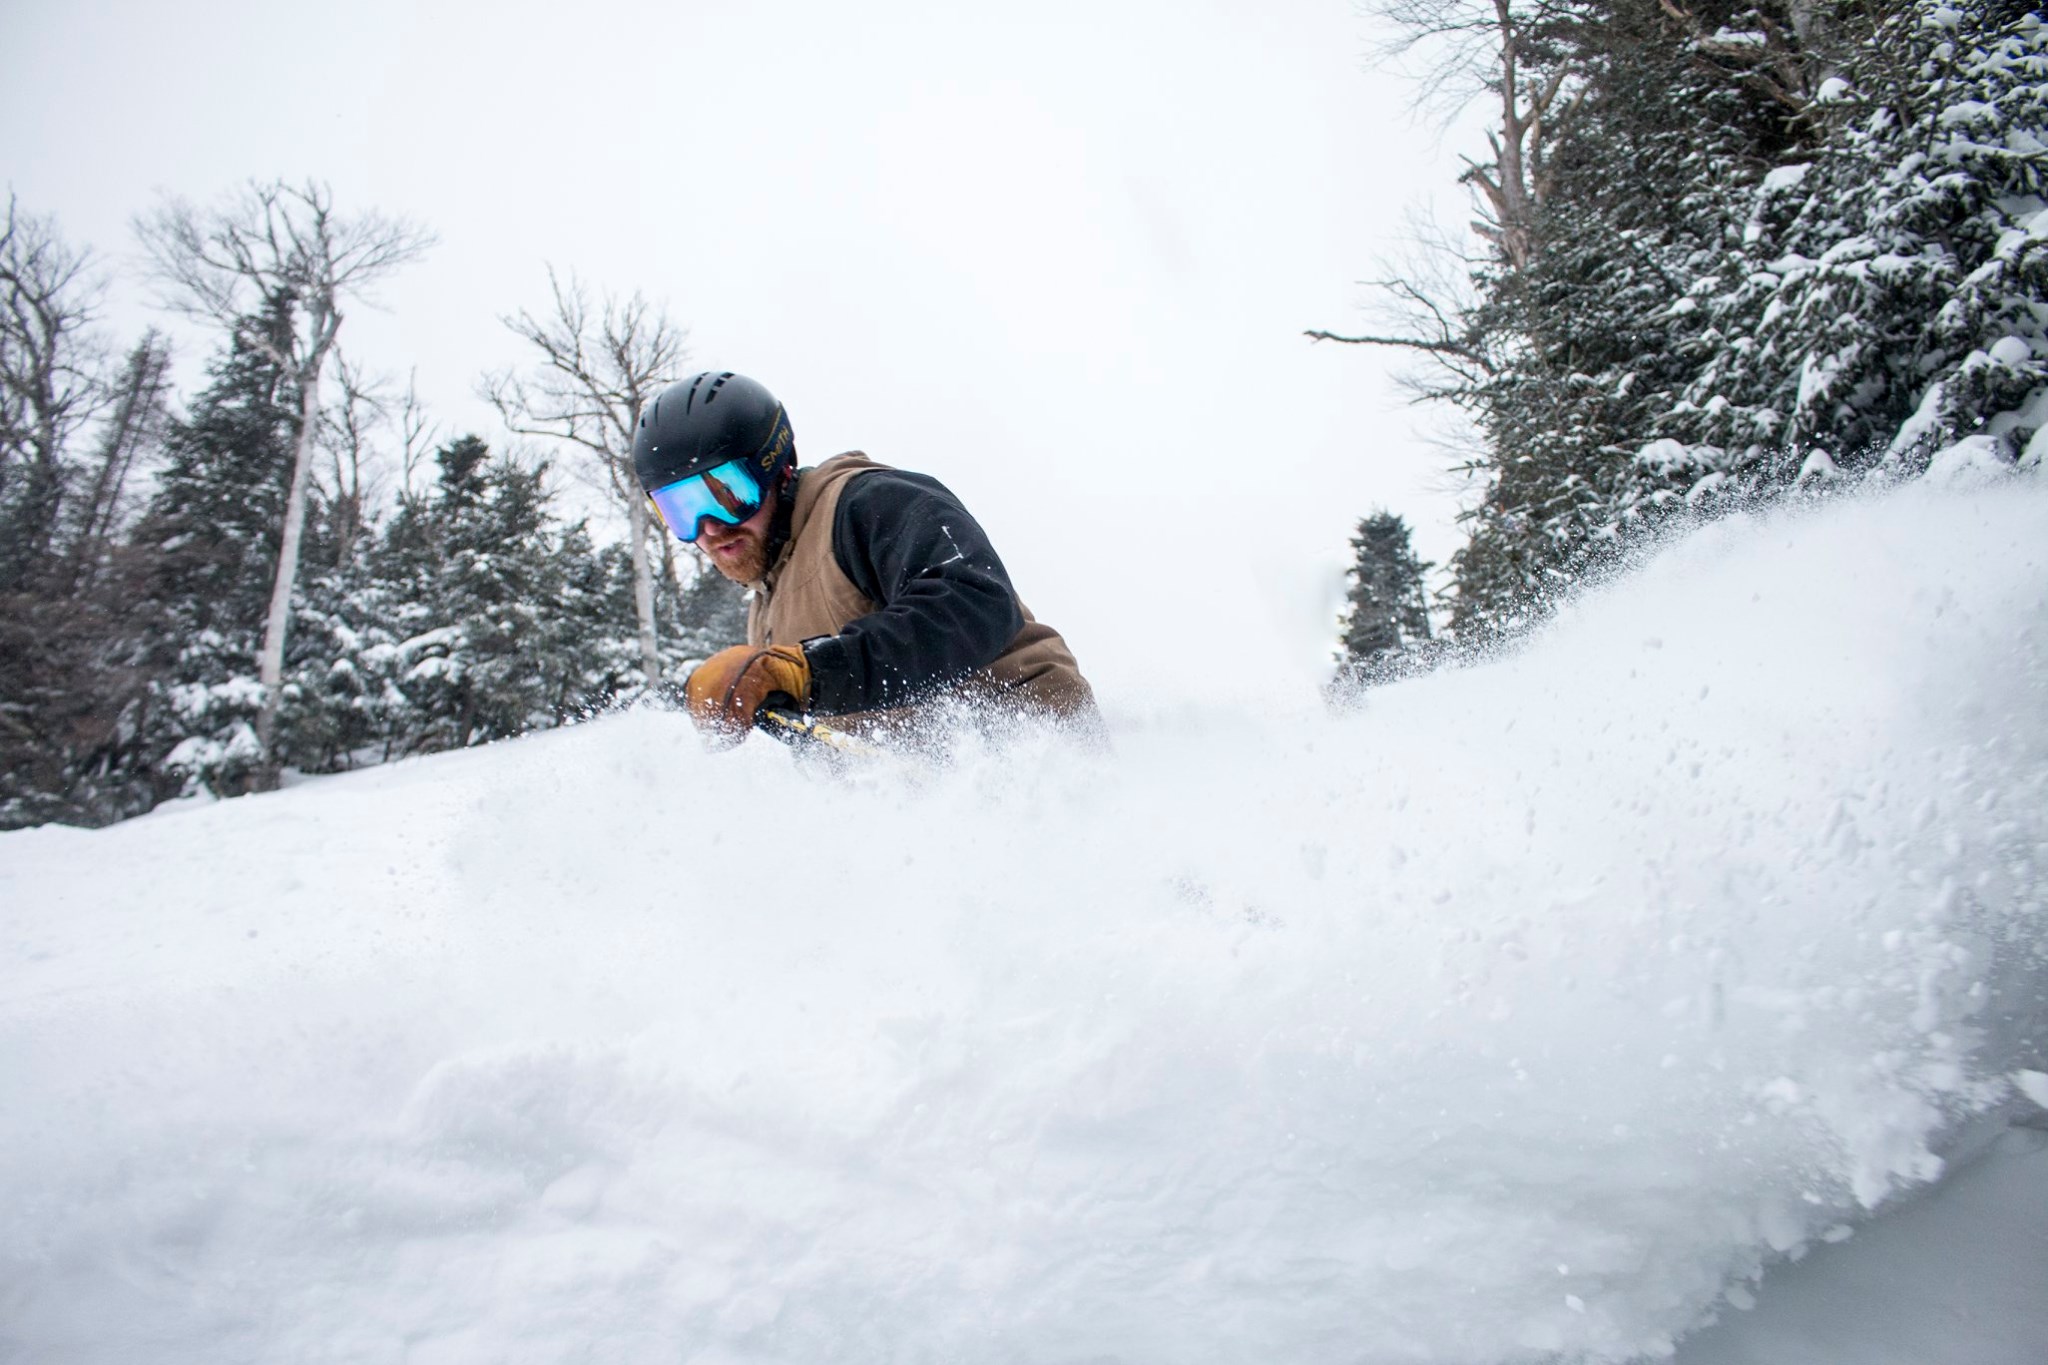 18 inches (45cm) of fresh snow, Whiteface Mountain (Lake Placid)